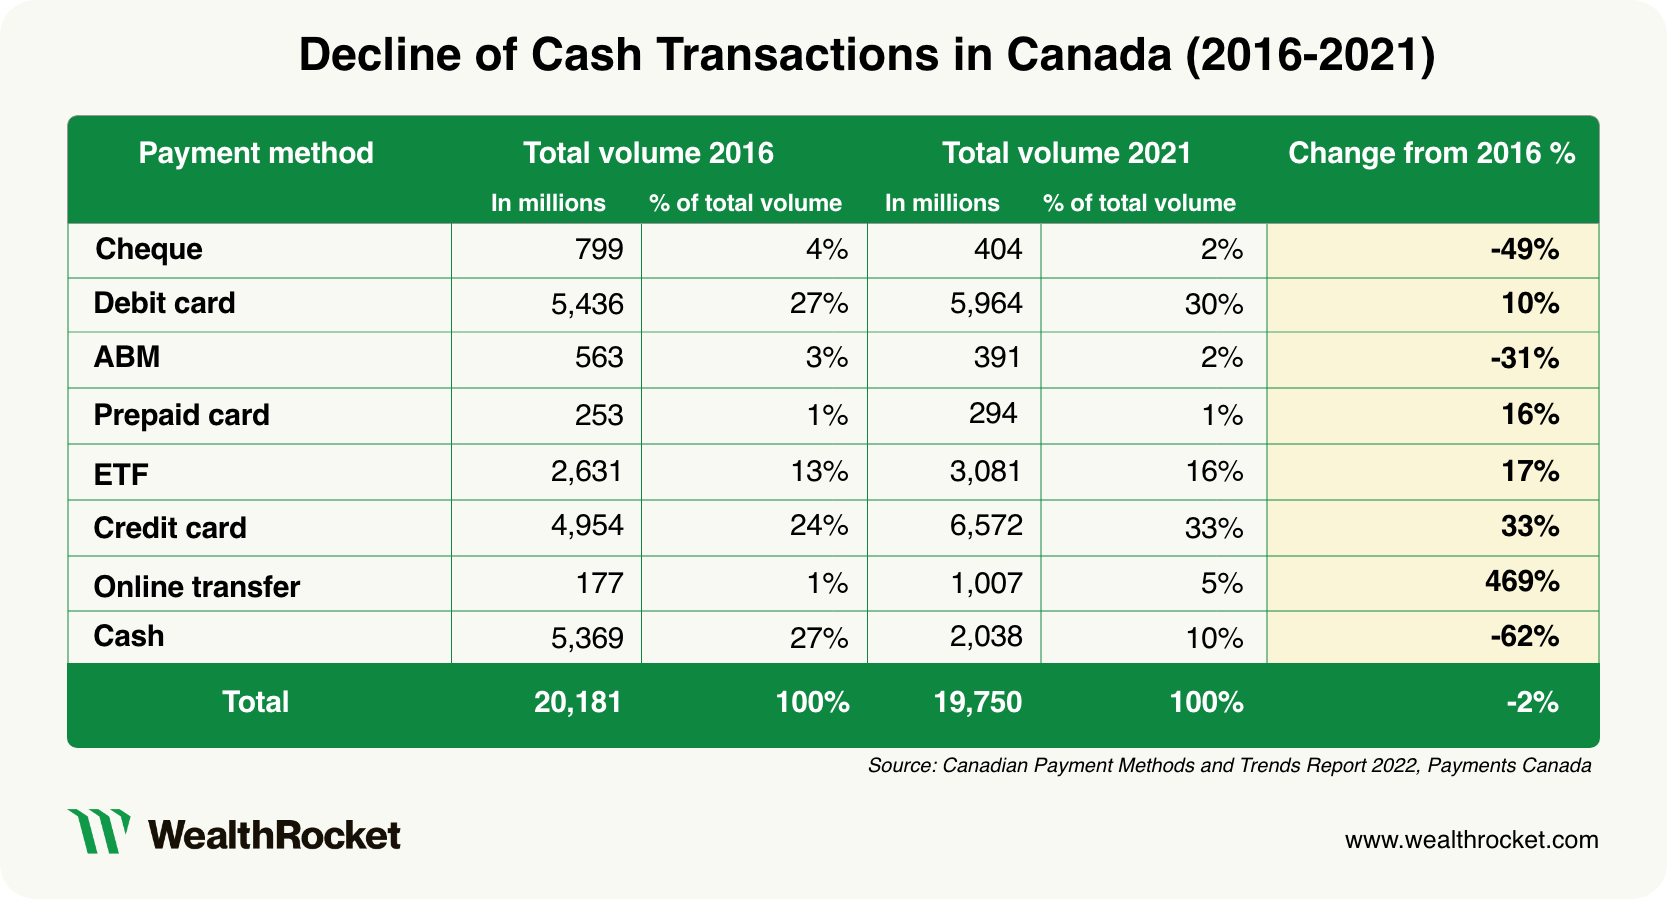 Table showing the decline in Canadians' use of cash transactions from 2016-2021